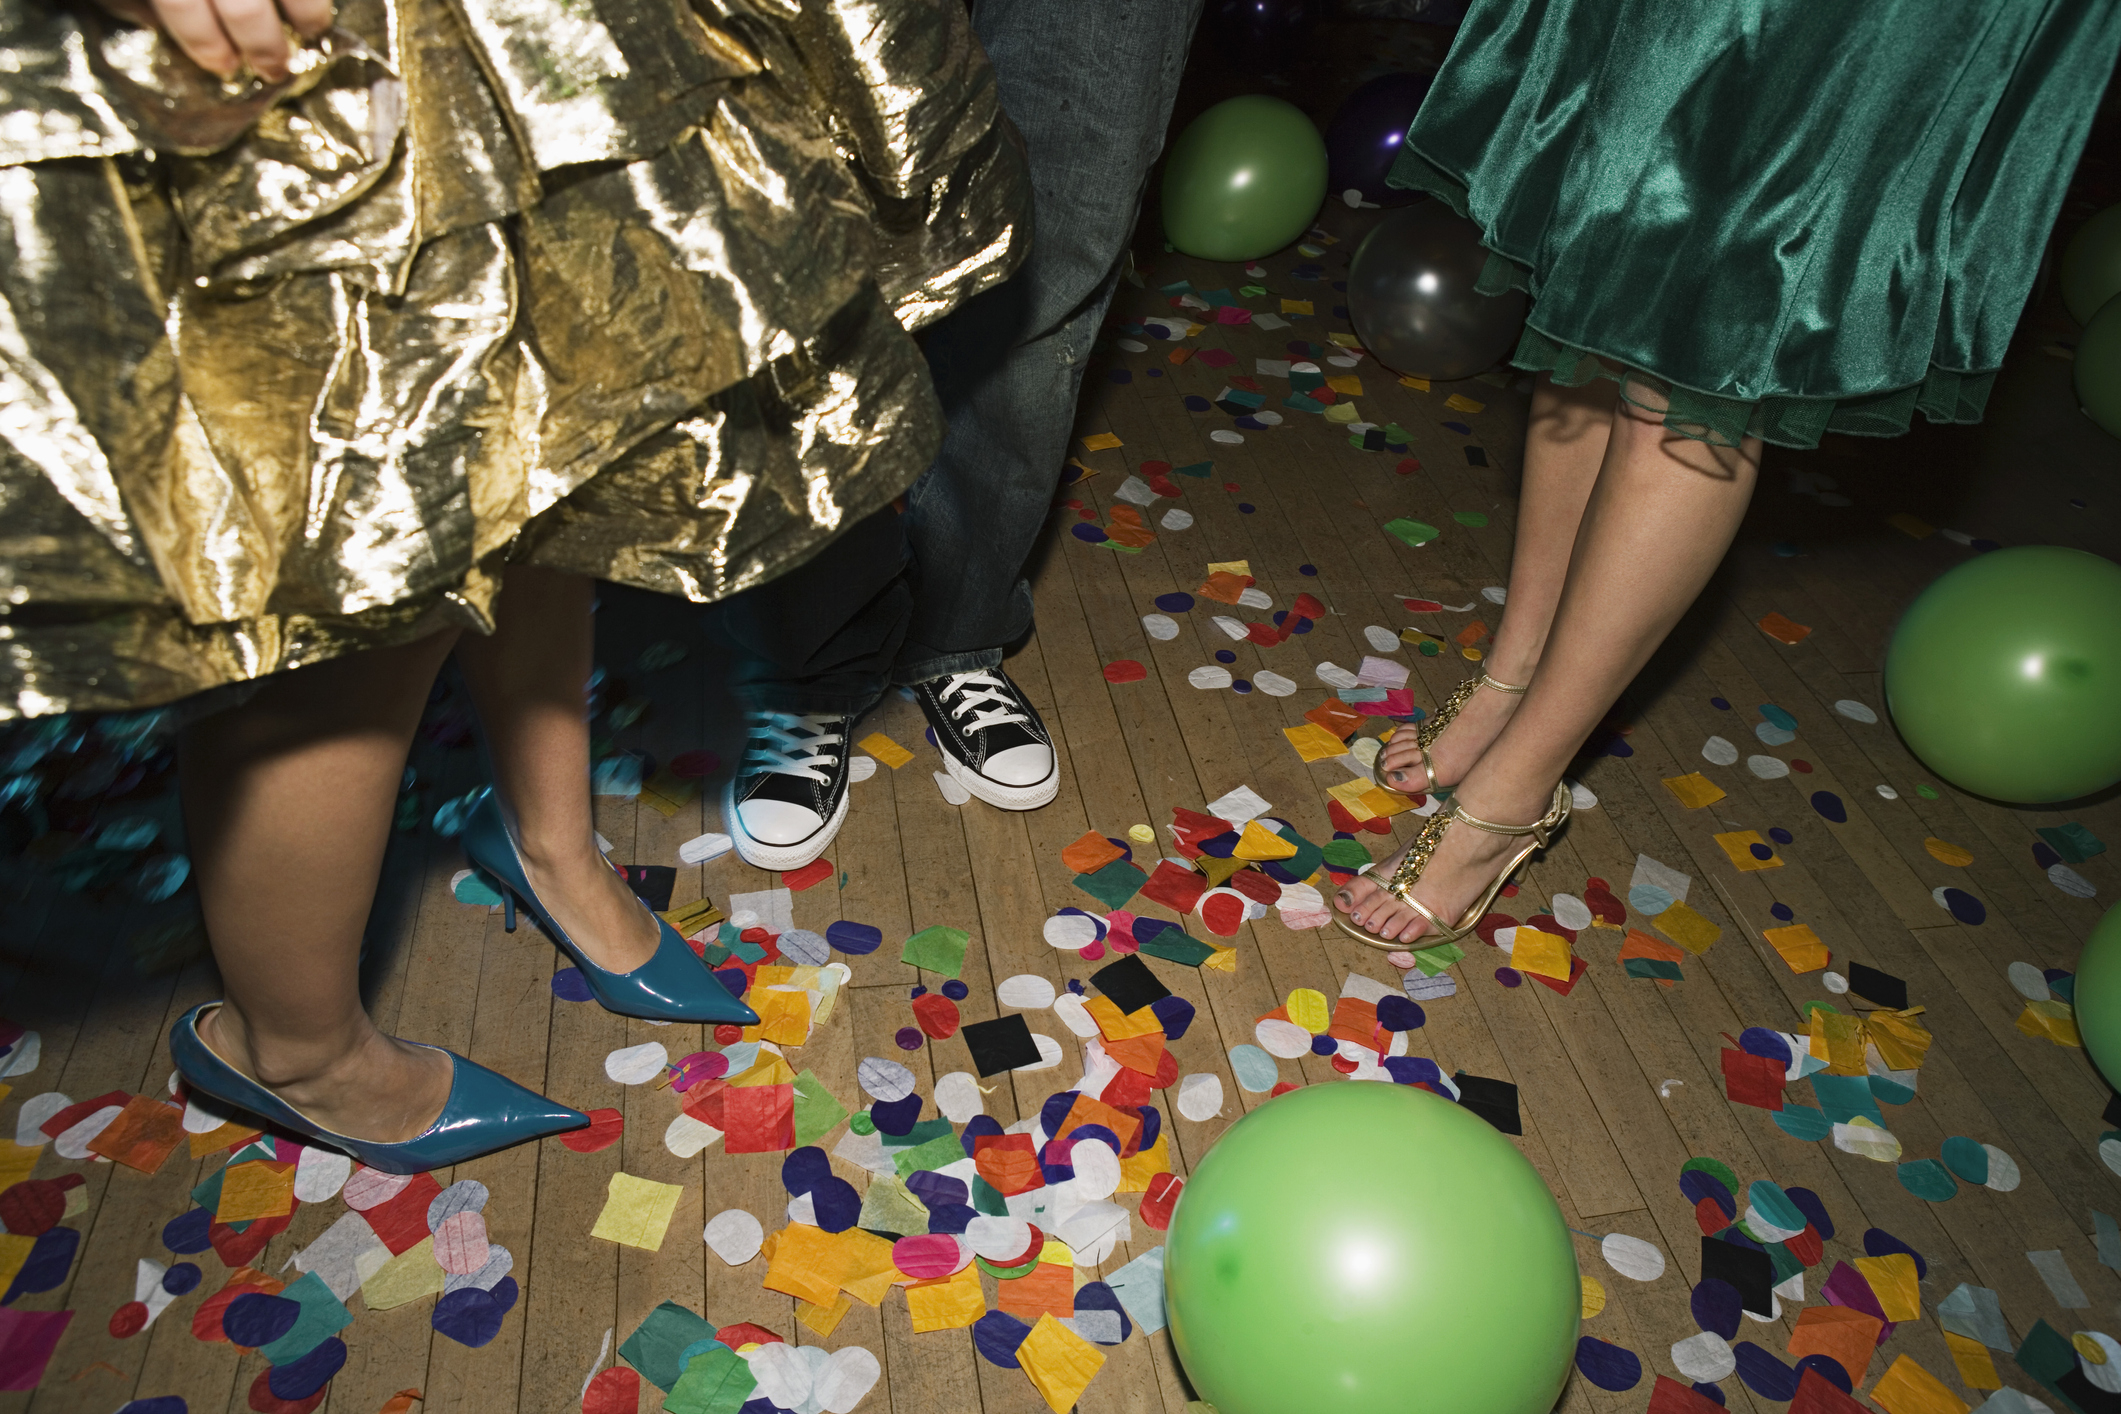 People at a dance with confetti and balloons on the floor